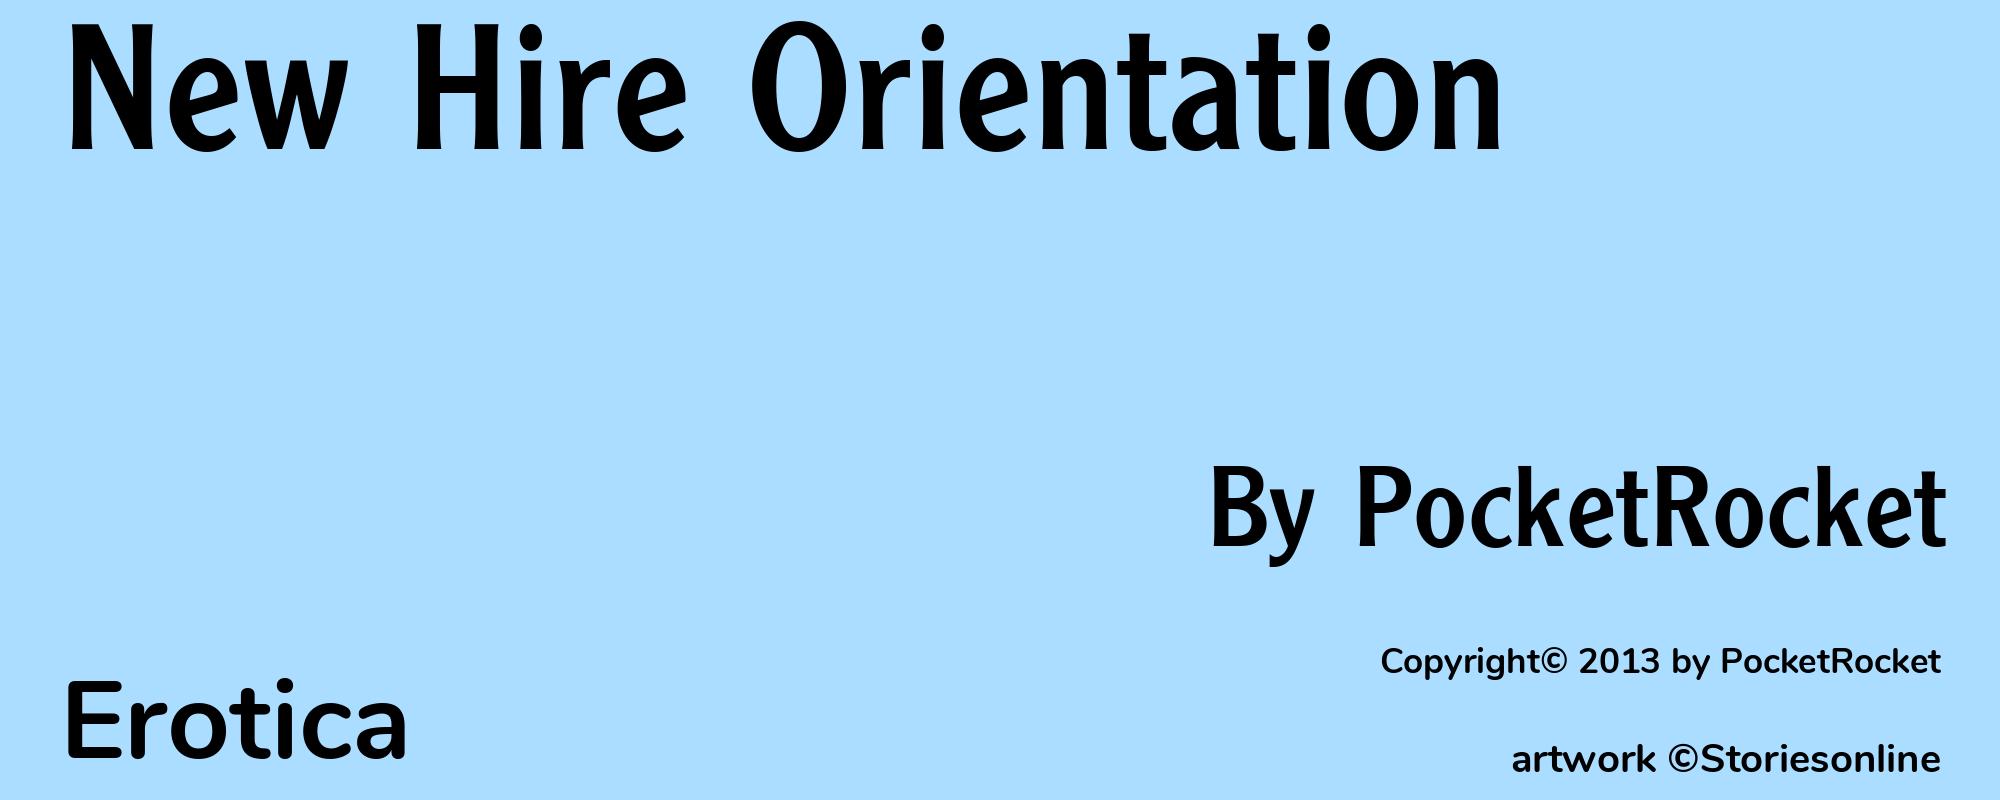 New Hire Orientation - Cover